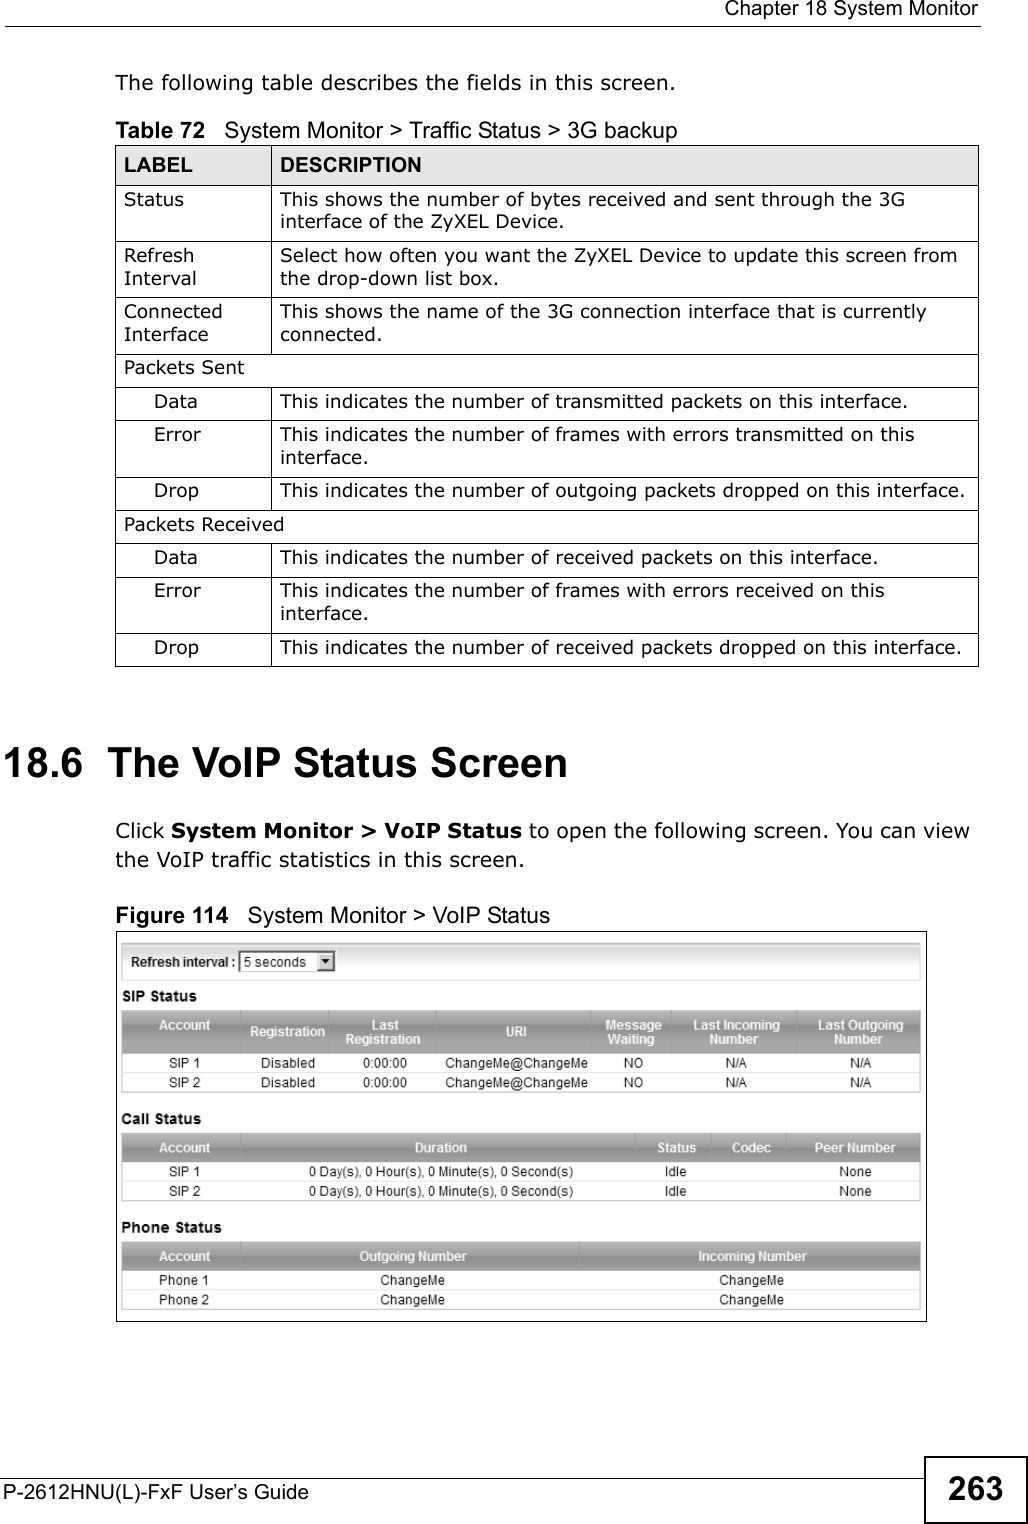  Chapter 18 System MonitorP-2612HNU(L)-FxF User’s Guide 263The following table describes the fields in this screen.   18.6  The VoIP Status Screen Click System Monitor &gt; VoIP Status to open the following screen. You can viewthe VoIP traffic statistics in this screen.Figure 114   System Monitor &gt; VoIP StatusTable 72   System Monitor &gt; Traffic Status &gt; 3G backupLABEL DESCRIPTIONStatus This shows the number of bytes received and sent through the 3Ginterface of the ZyXEL Device.RefreshIntervalSelect how often you want the ZyXEL Device to update this screen from the drop-down list box.Connected InterfaceThis shows the name of the 3G connection interface that is currently connected.Packets Sent Data  This indicates the number of transmitted packets on this interface.Error This indicates the number of frames with errors transmitted on this interface.Drop This indicates the number of outgoing packets dropped on this interface.Packets ReceivedData  This indicates the number of received packets on this interface.Error This indicates the number of frames with errors received on this interface.Drop This indicates the number of received packets dropped on this interface.